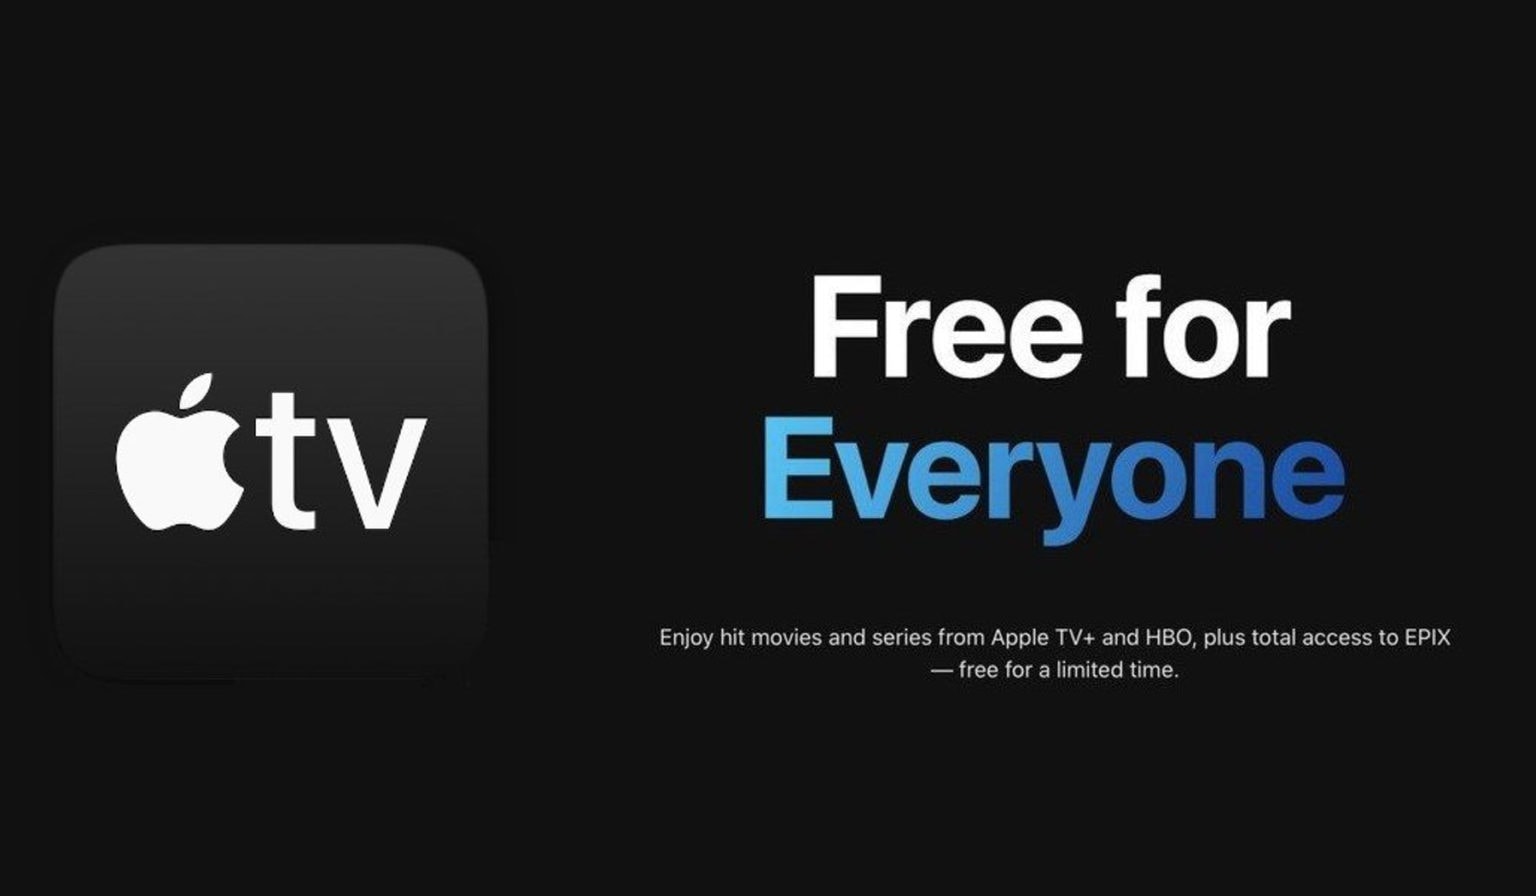 apple-tv-plus-free-for-everyone